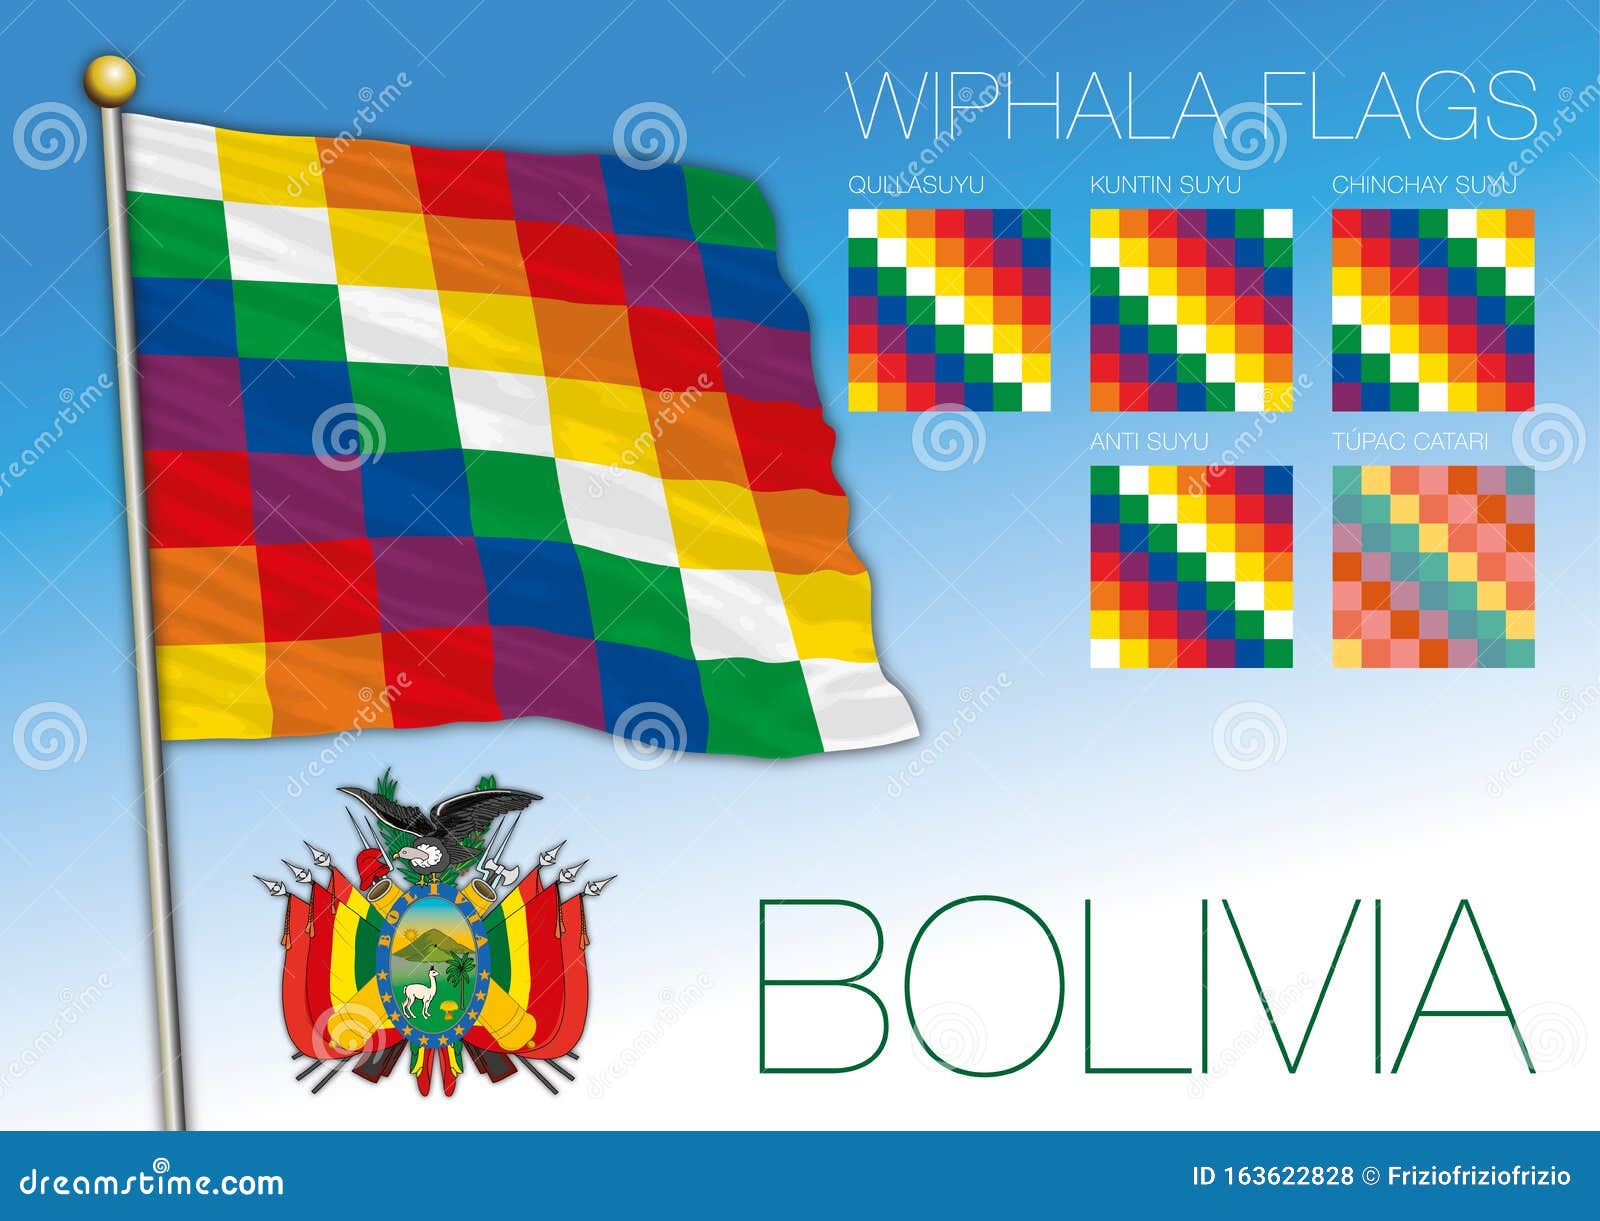 wiphala official flags, bolivia,  